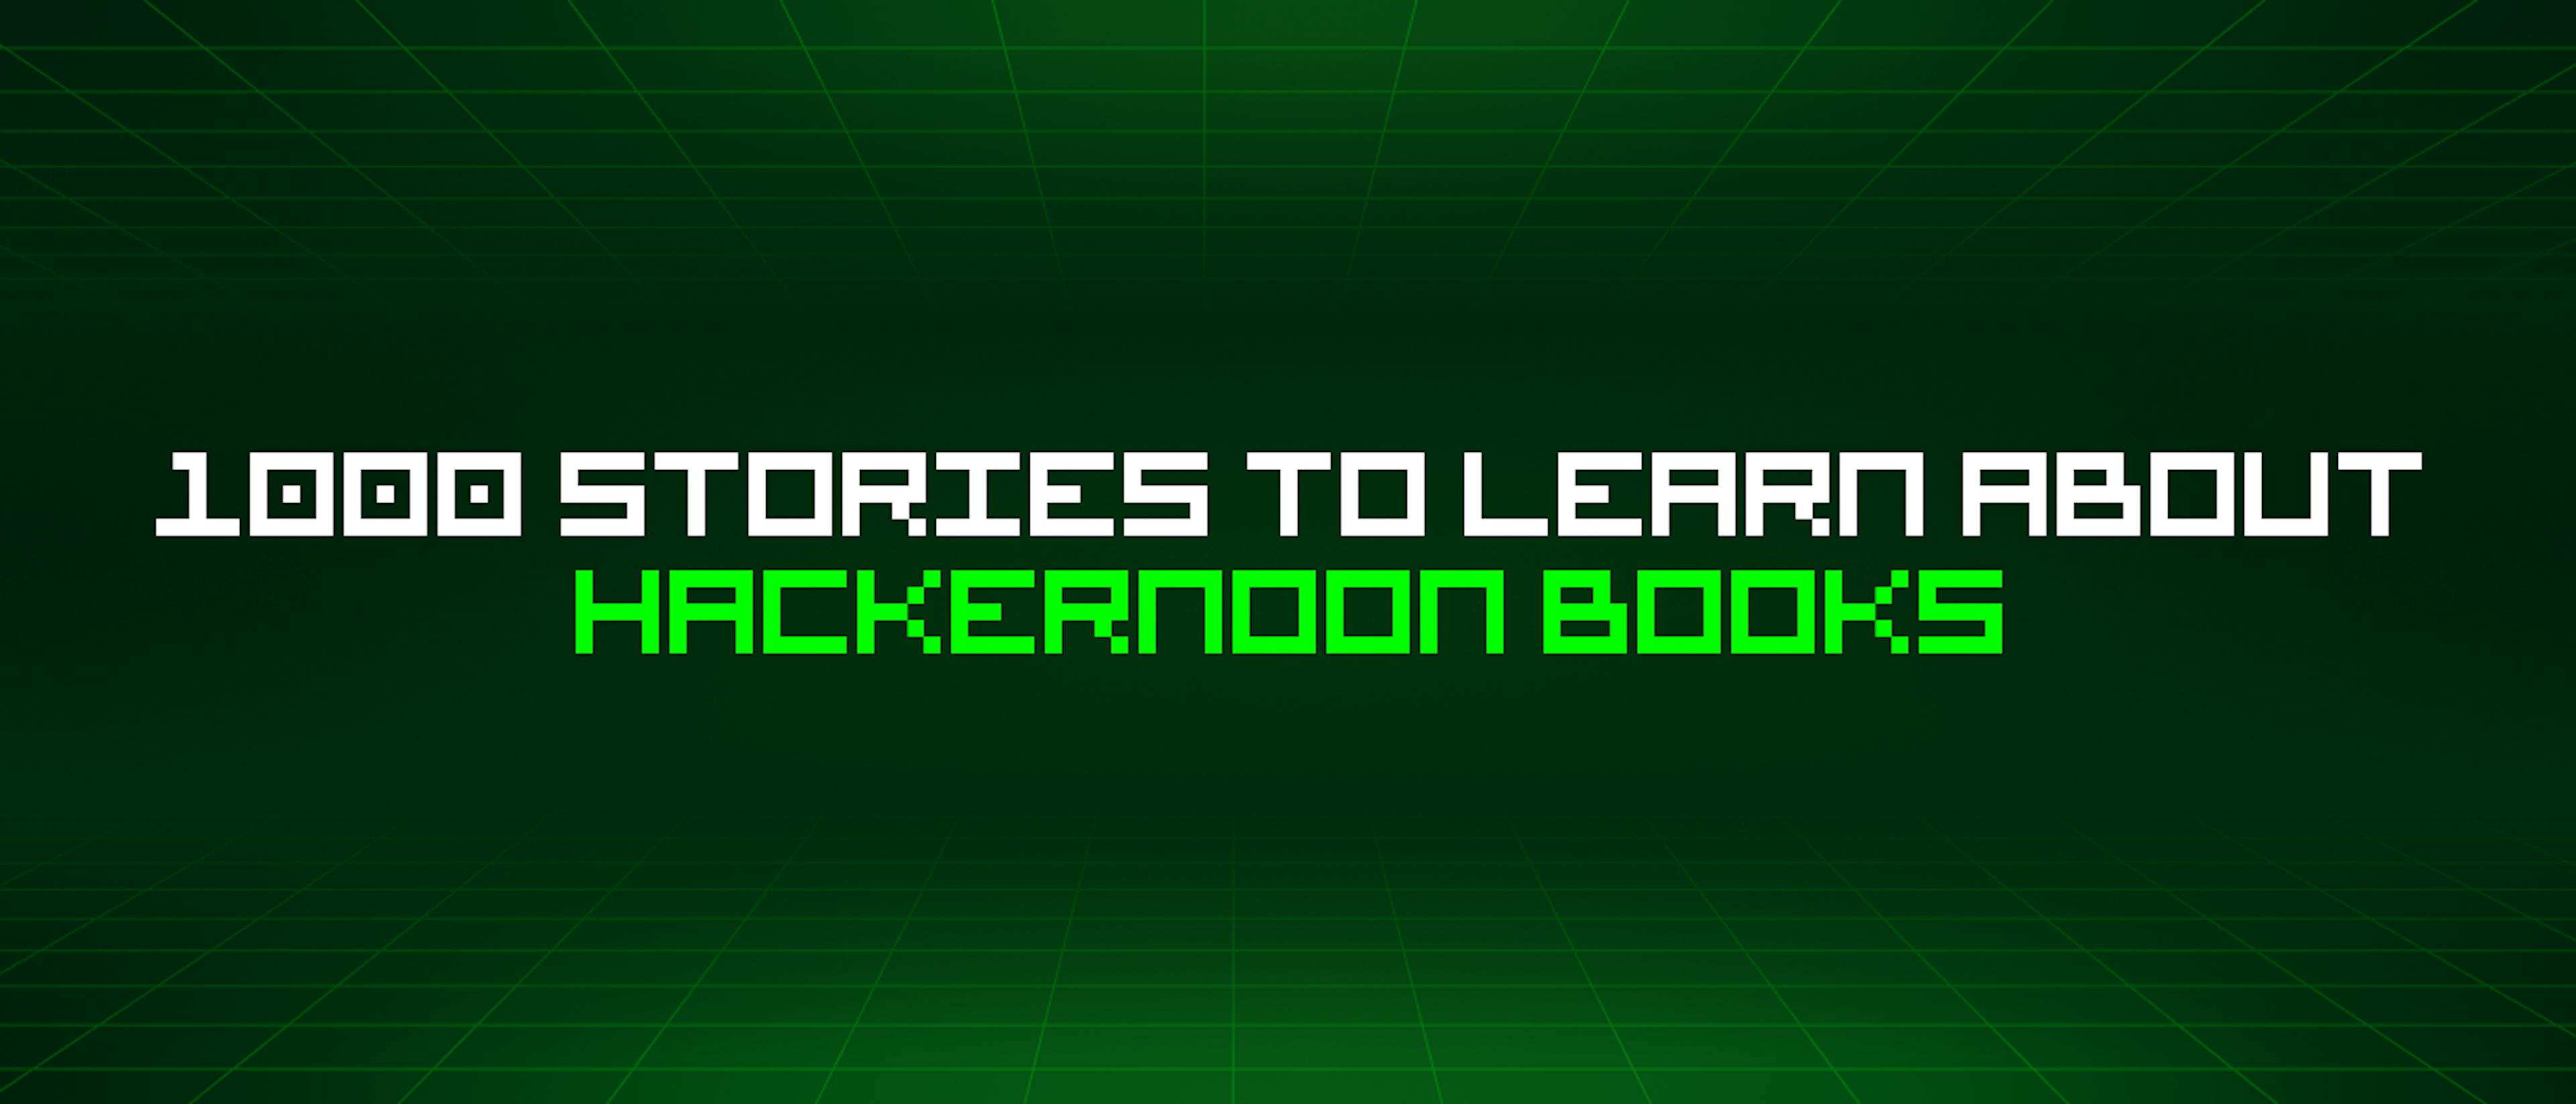 featured image - 1000 Stories To Learn About Hackernoon Books